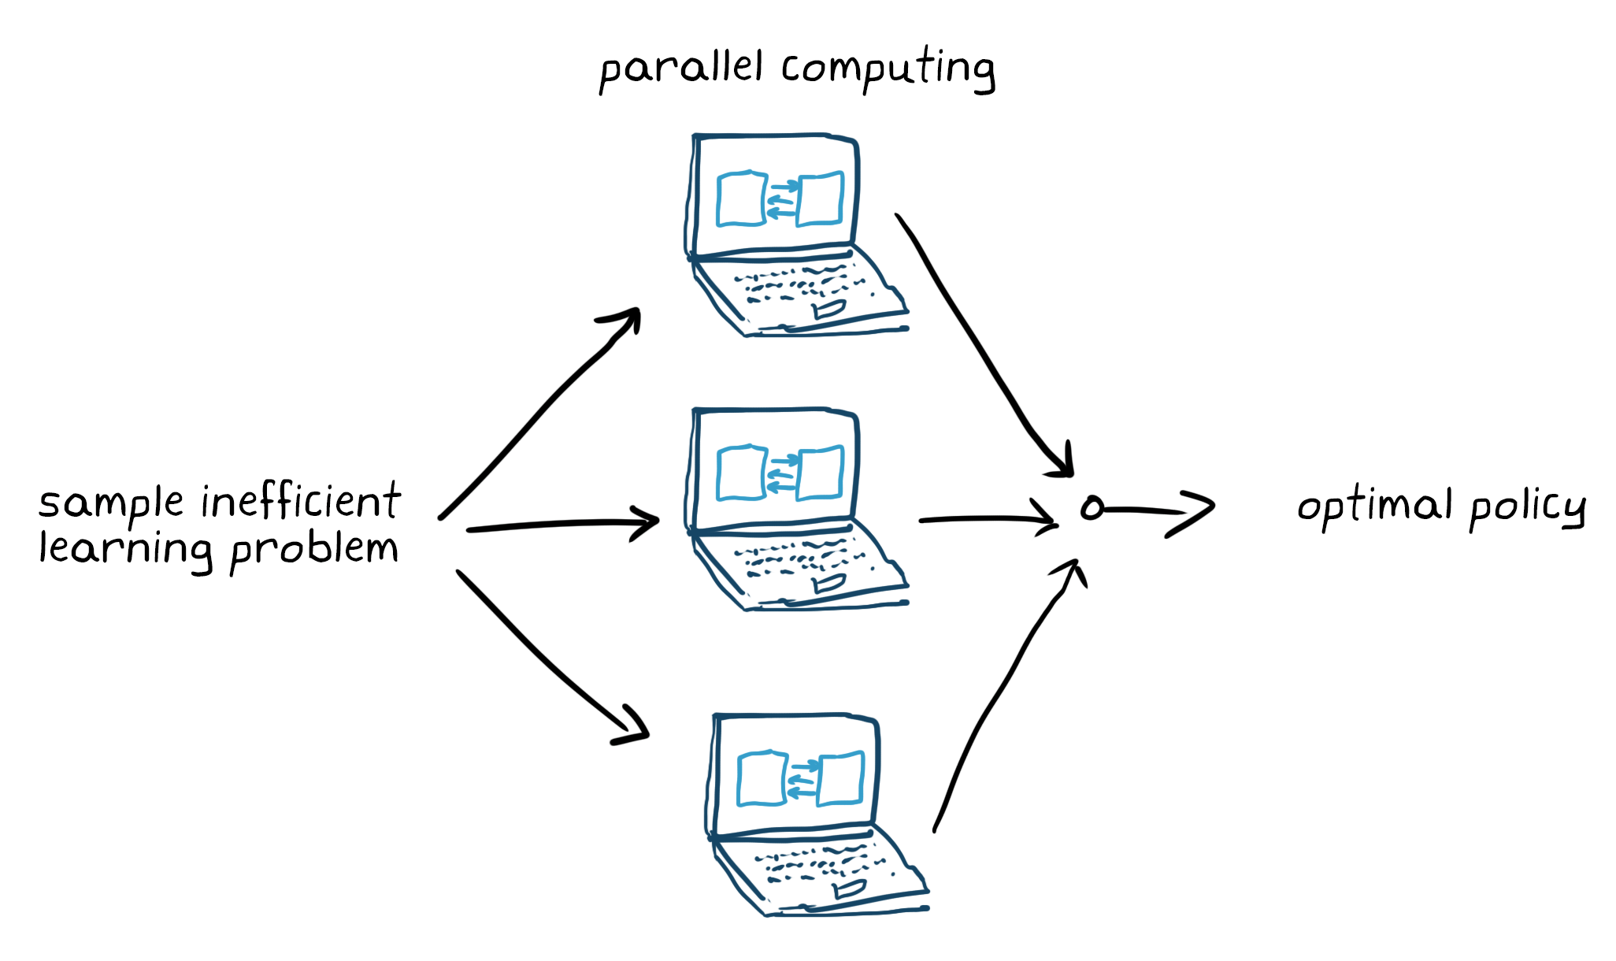 Speed up training in sample inefficient reinforcement learning using parallel computing to achieve the optimal policy.